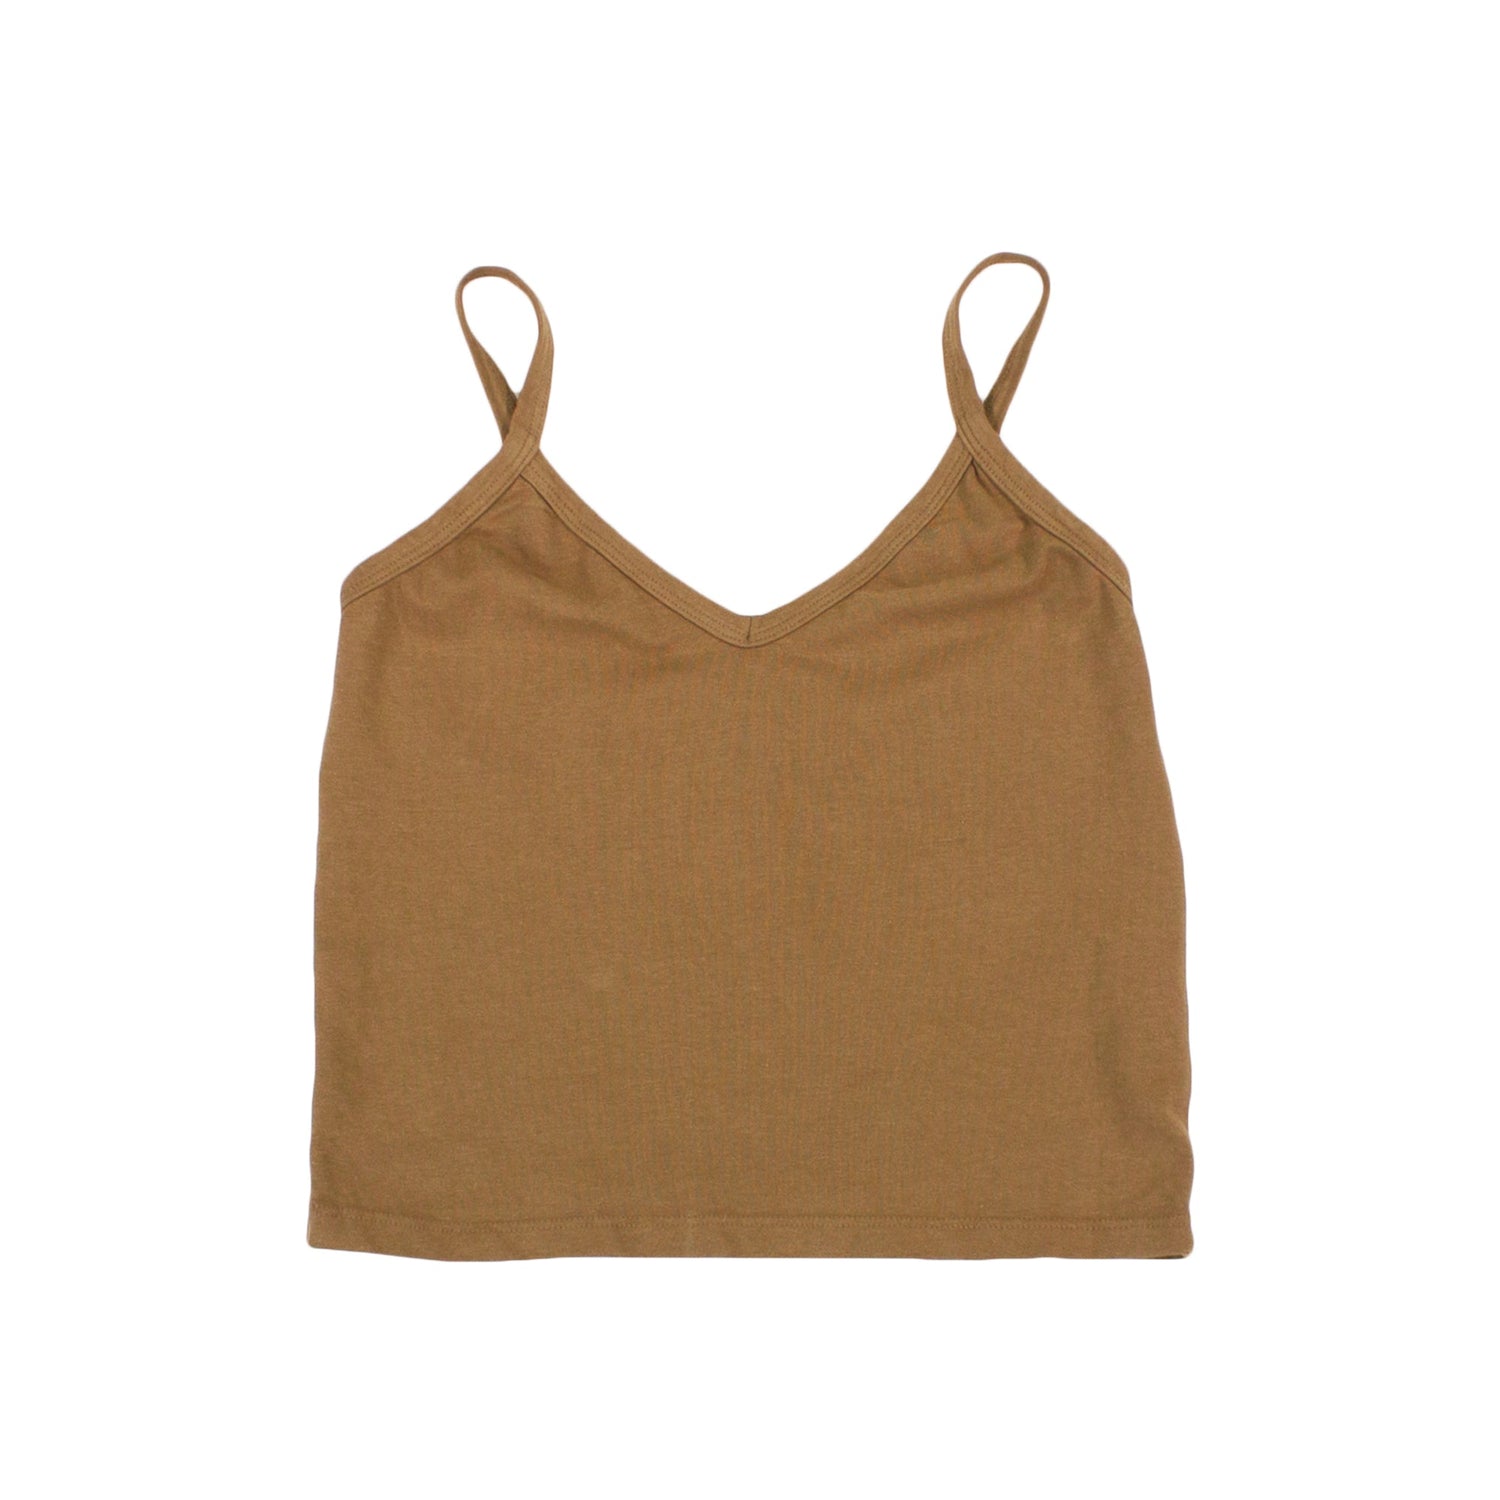 Hemp and organic cotton tank top by Jungmaven; A fitted and flattering silhouette that never goes out of style. Made from a super soft hemp blend with the perfect amount of stretch. Layer or wear on its own.